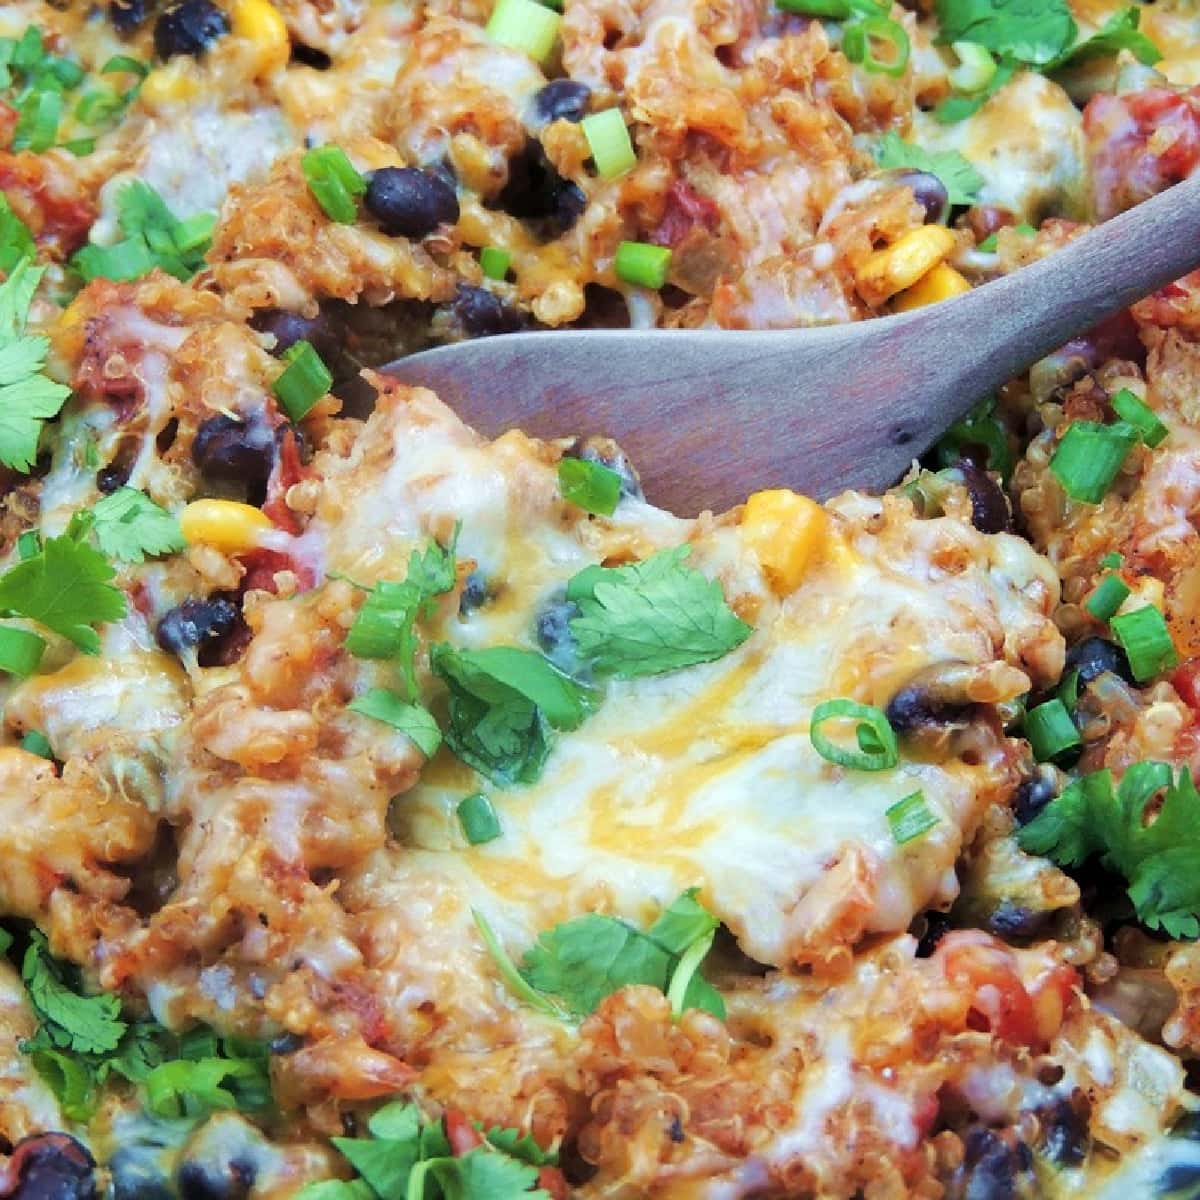 Close-up of Chicken Enchilada Quinoa in a slow cooker, with a wooden spoon scooping it out. The quinoa is topped with melted cheese, fresh chopped green onions, and cilantro.